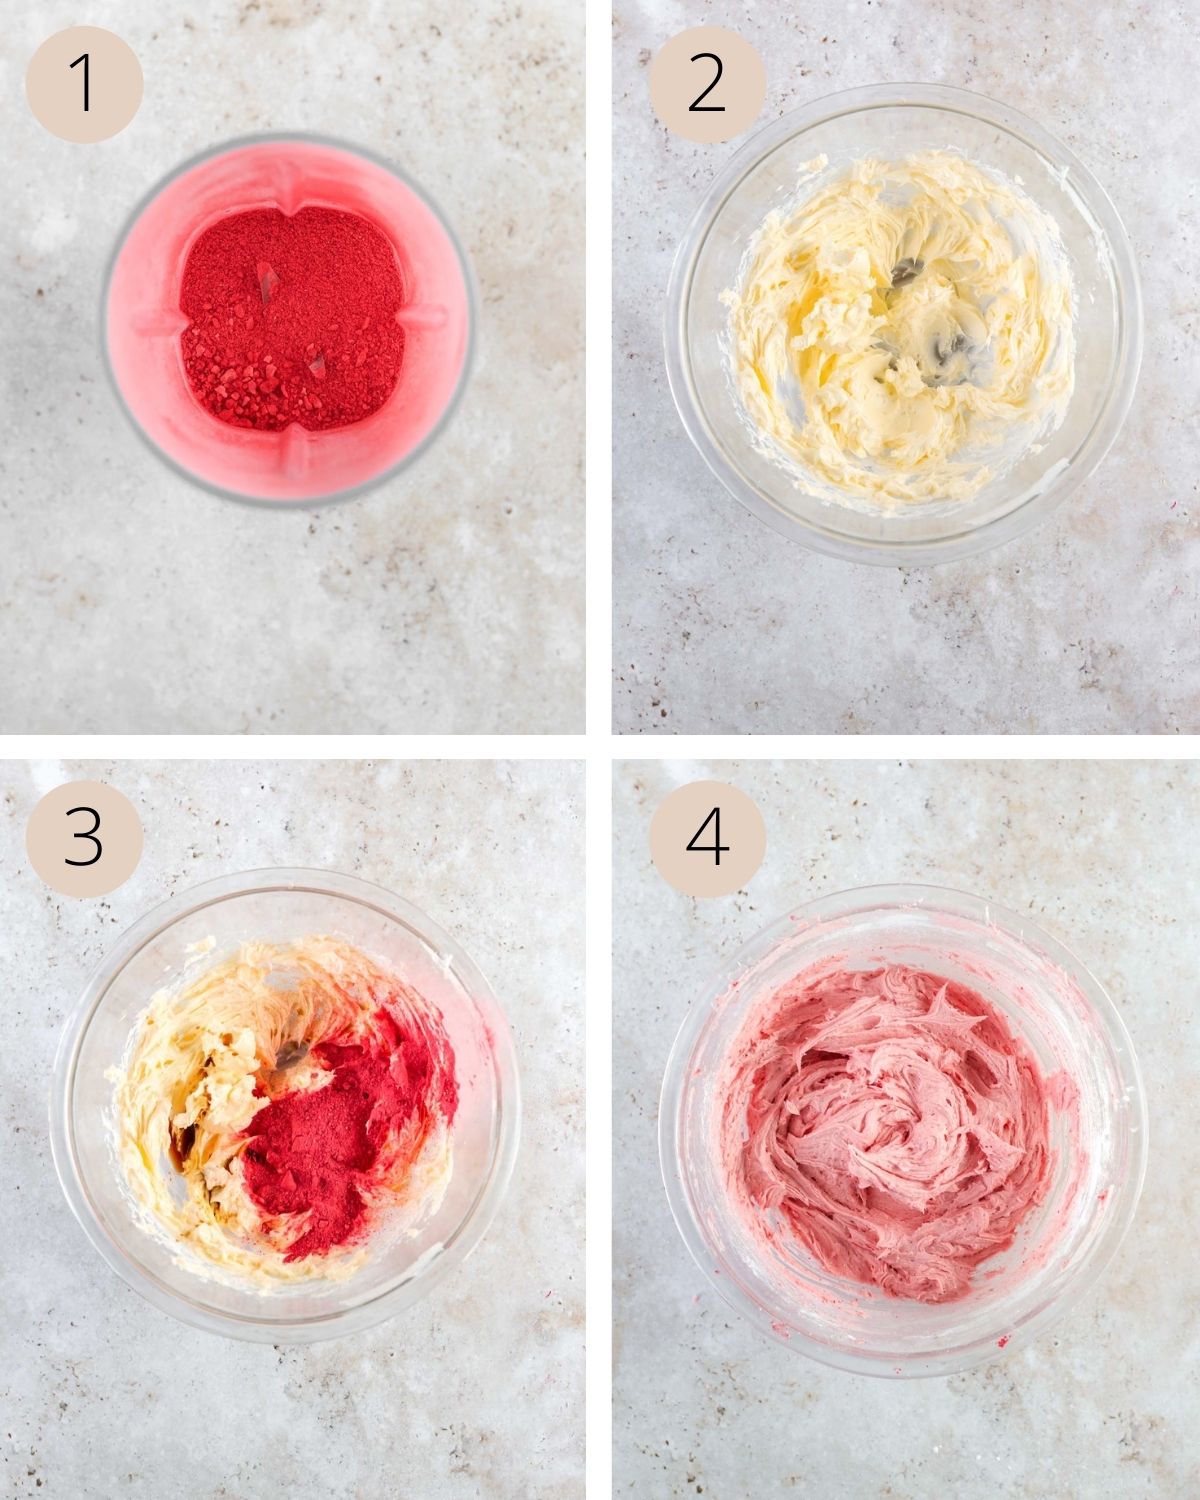 four images demonstrating the steps of making strawberry buttercream frosting, including blending the strawberries, beating the butter, and adding the sugar.